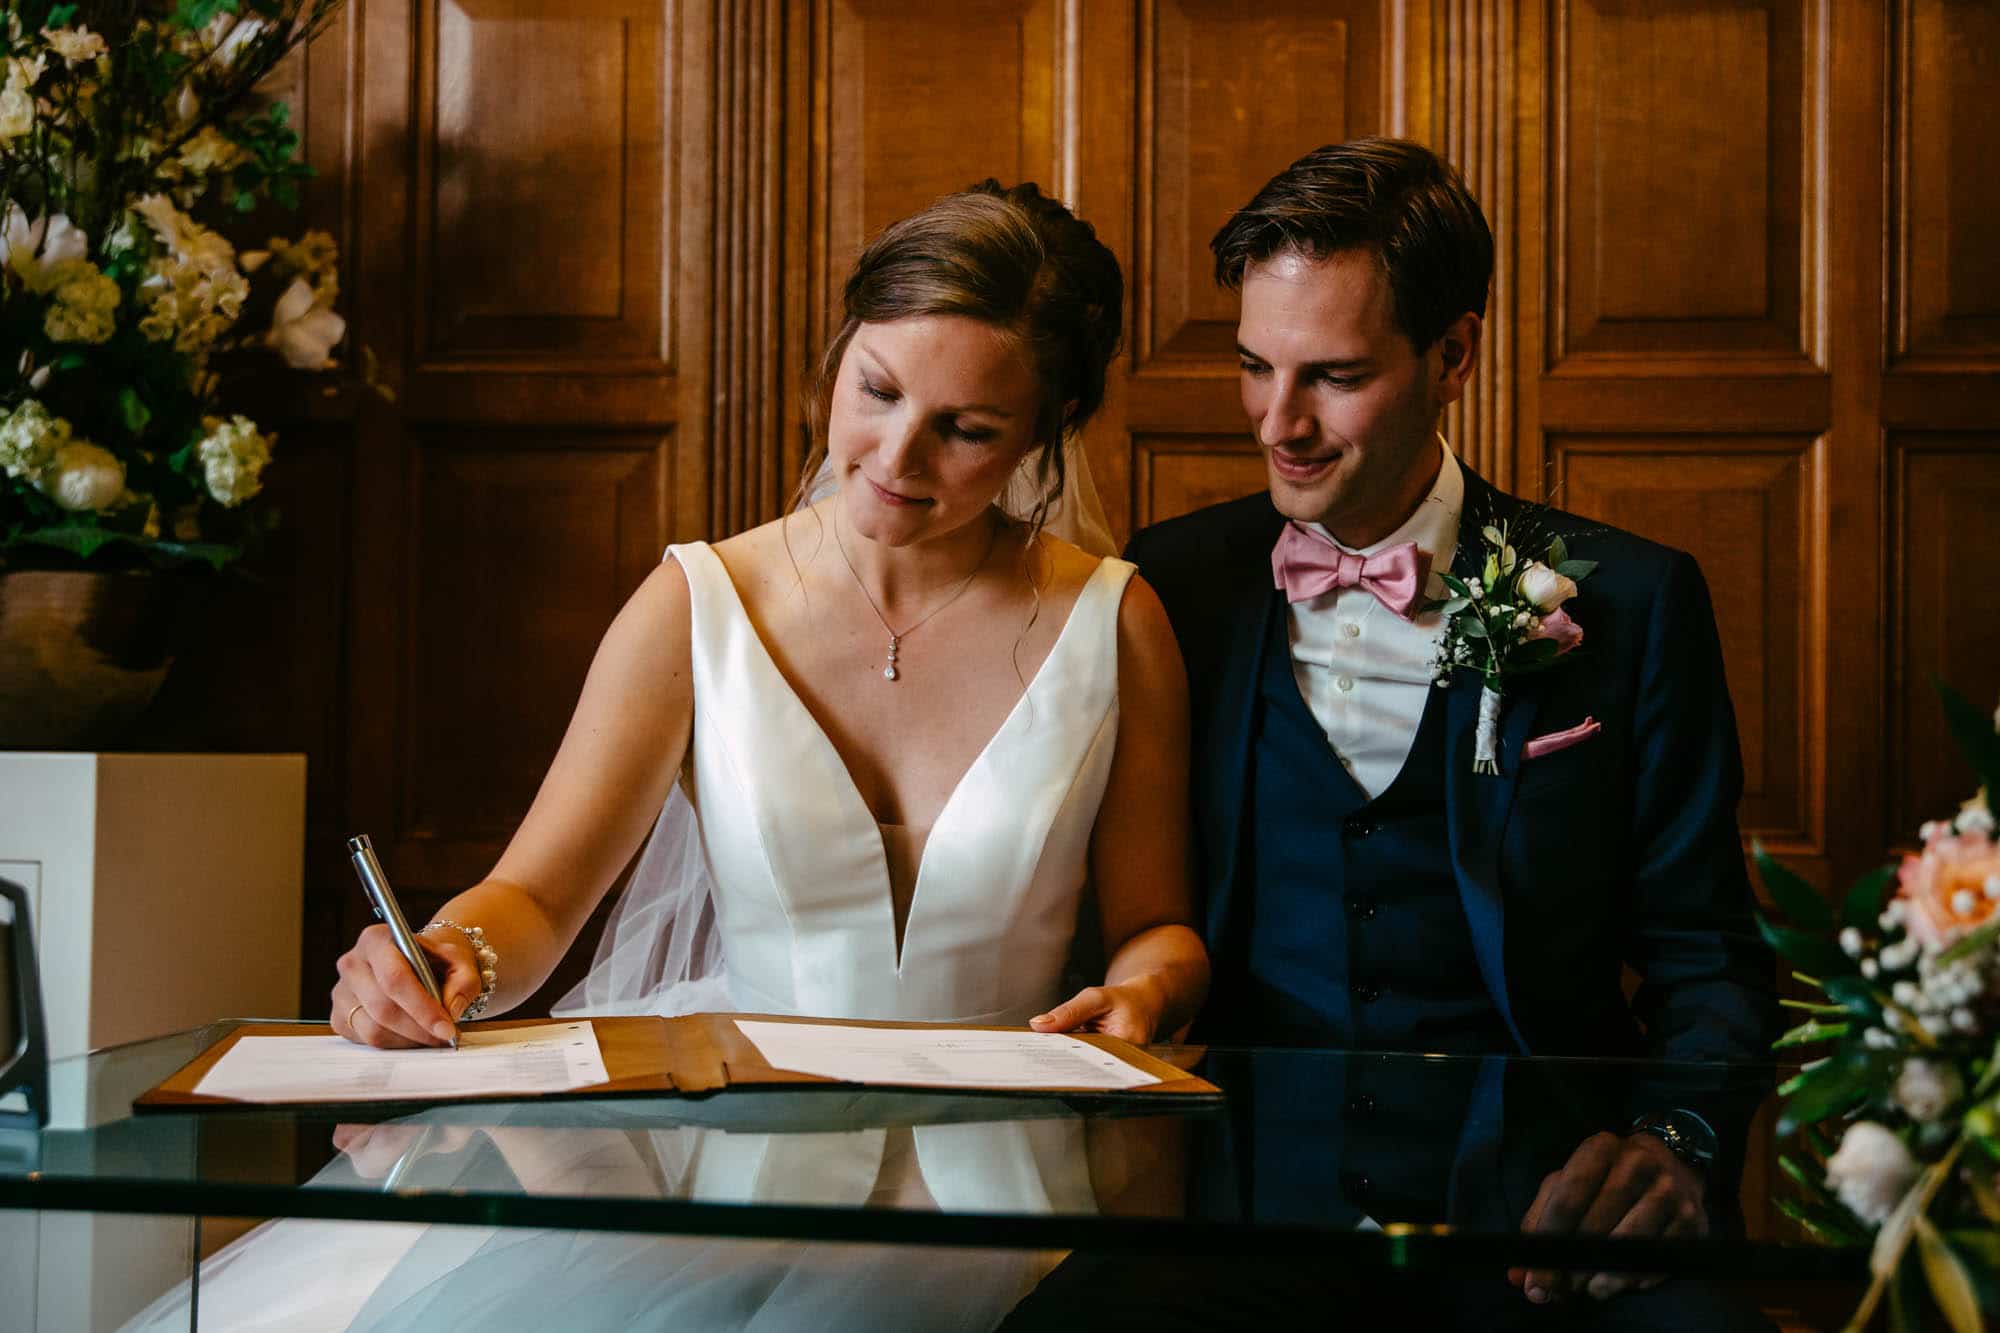 A bride and groom signing their wedding vows at a table.